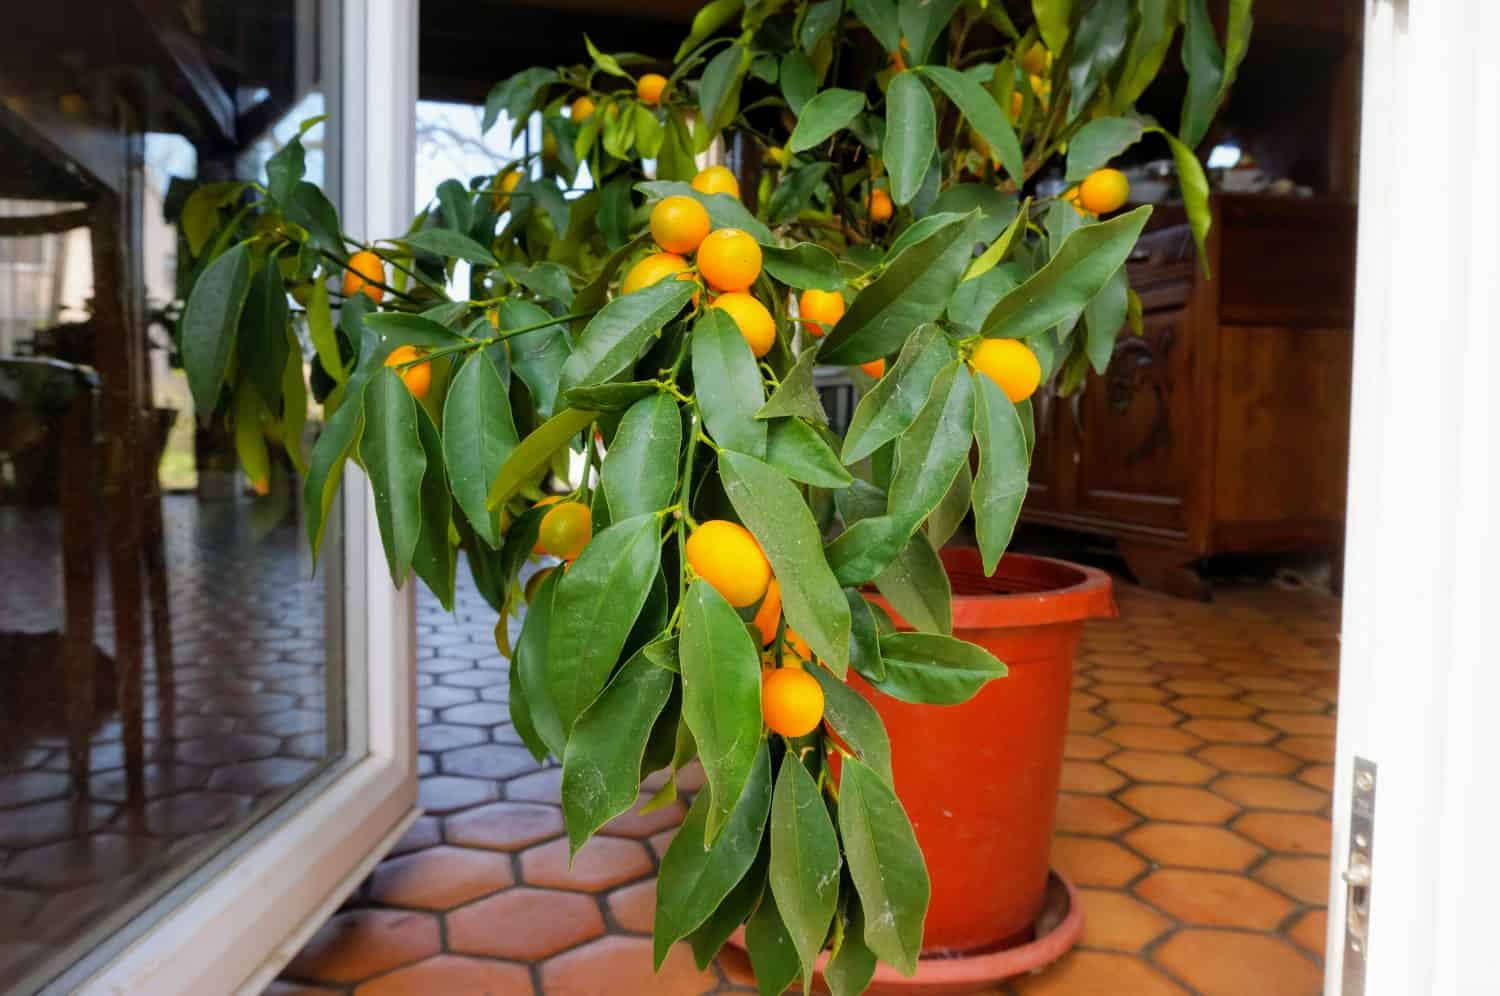 A fruiting lemon tree planted in a pot inside a house, installed at a window on a tiled floor, featuring big ripe orange fruits and green leaves